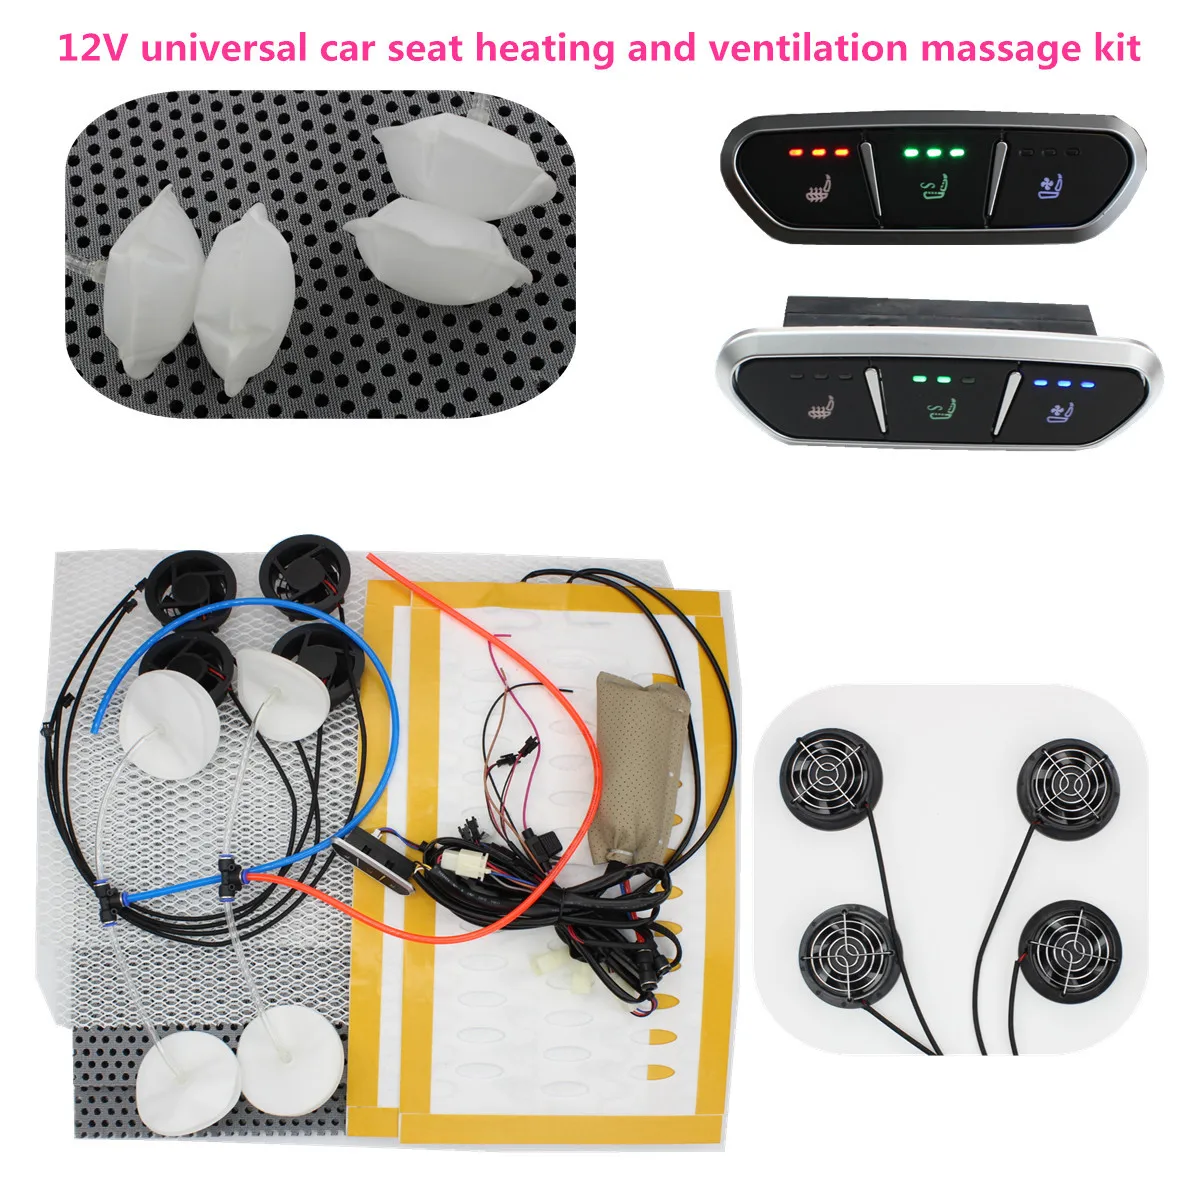 ​12V car seat ventilation kit combine heated and massager  4 air flow Fan cool + 2 heating pad  +  4 airpneumatic massage system